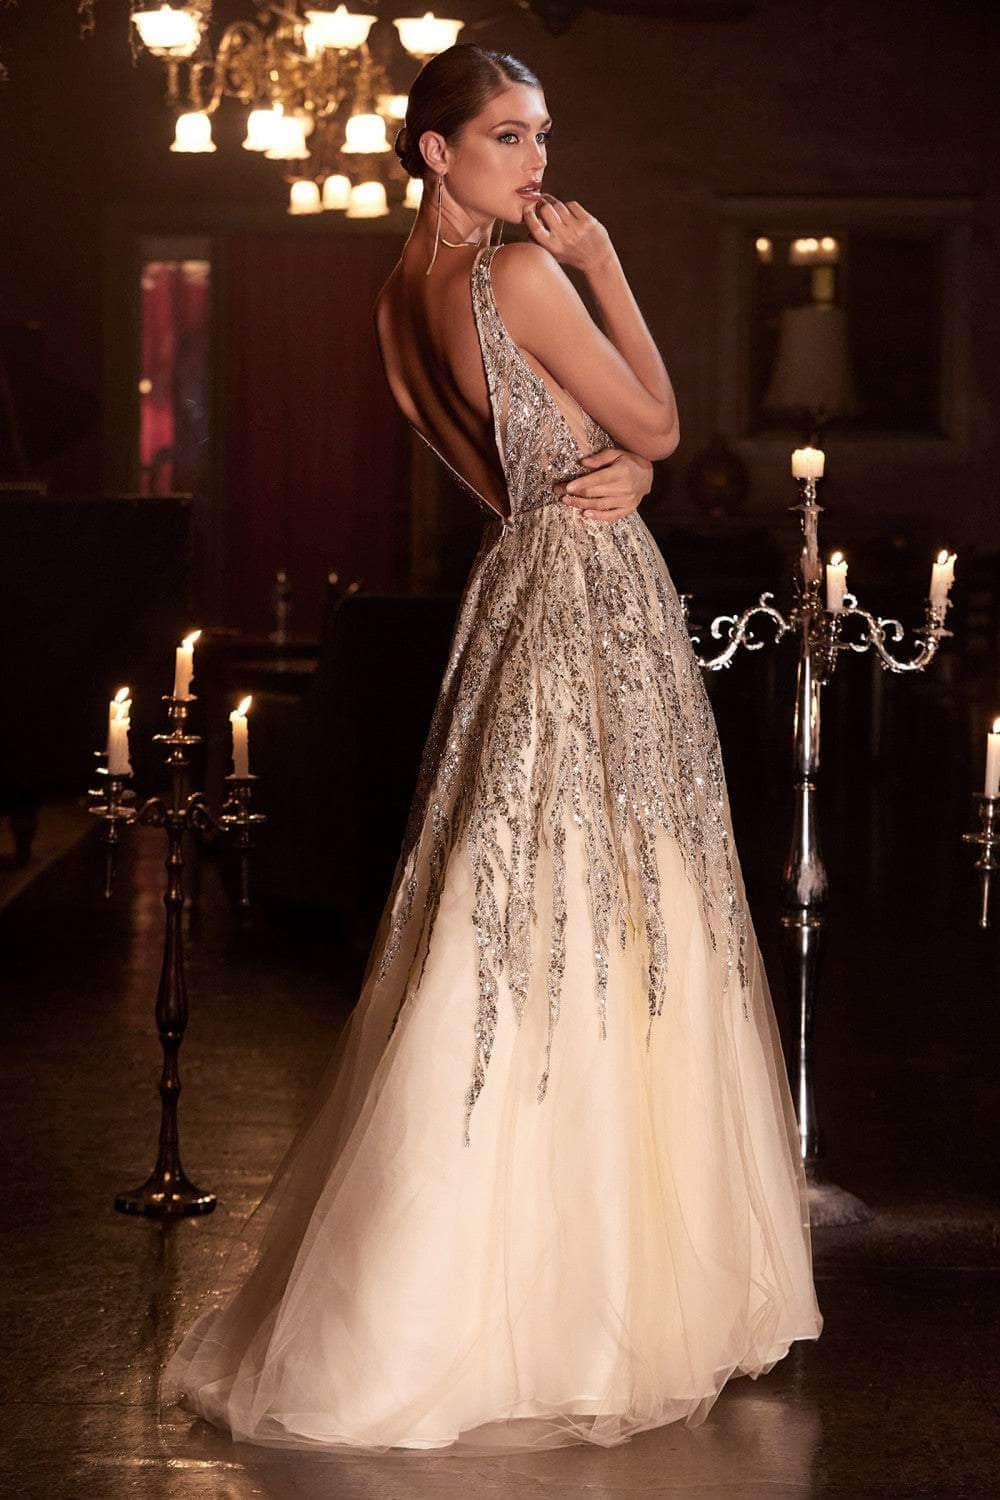 Cinderella Divine - Embellished Sleeveless Prom Dress C135 - 1 pc Champagne In Size 12 Available CCSALE 12 / Champagne